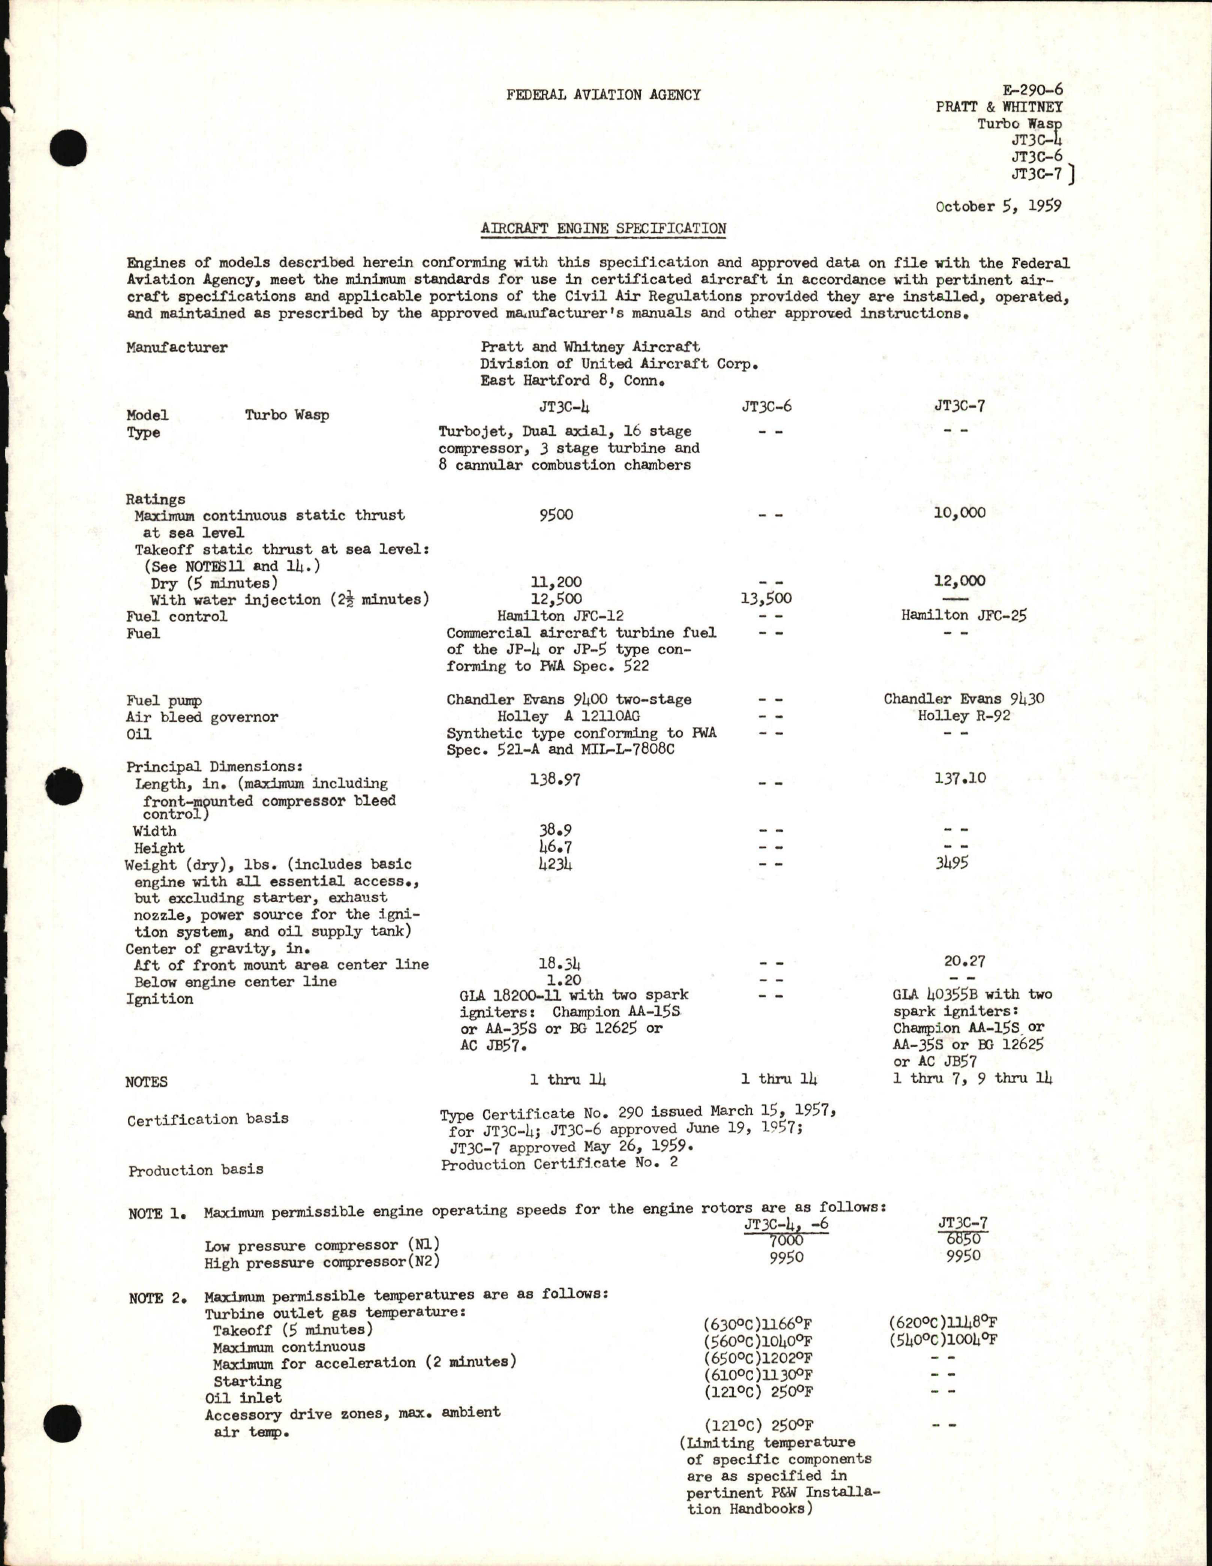 Sample page 1 from AirCorps Library document: JT3C-4, JT3C-6, and JT3C-7